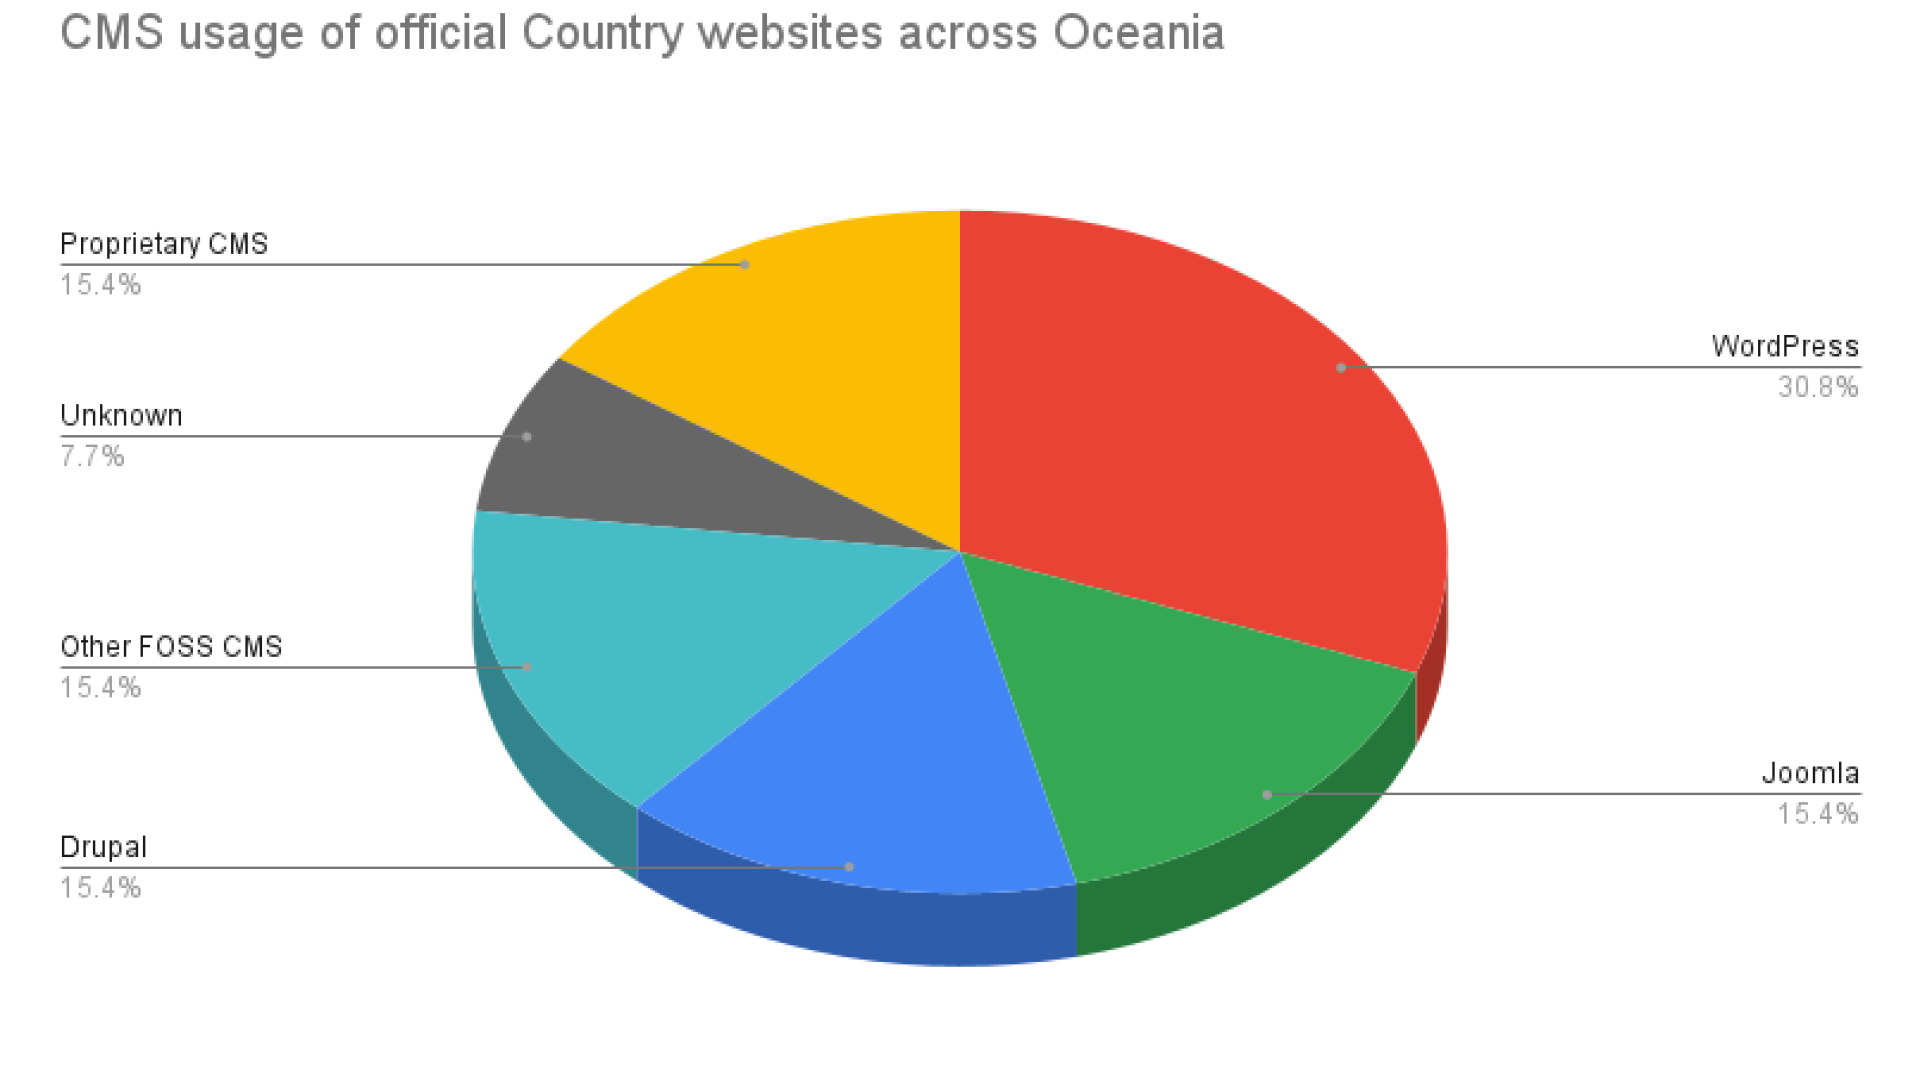 CMS usage of official country websites across Oceania